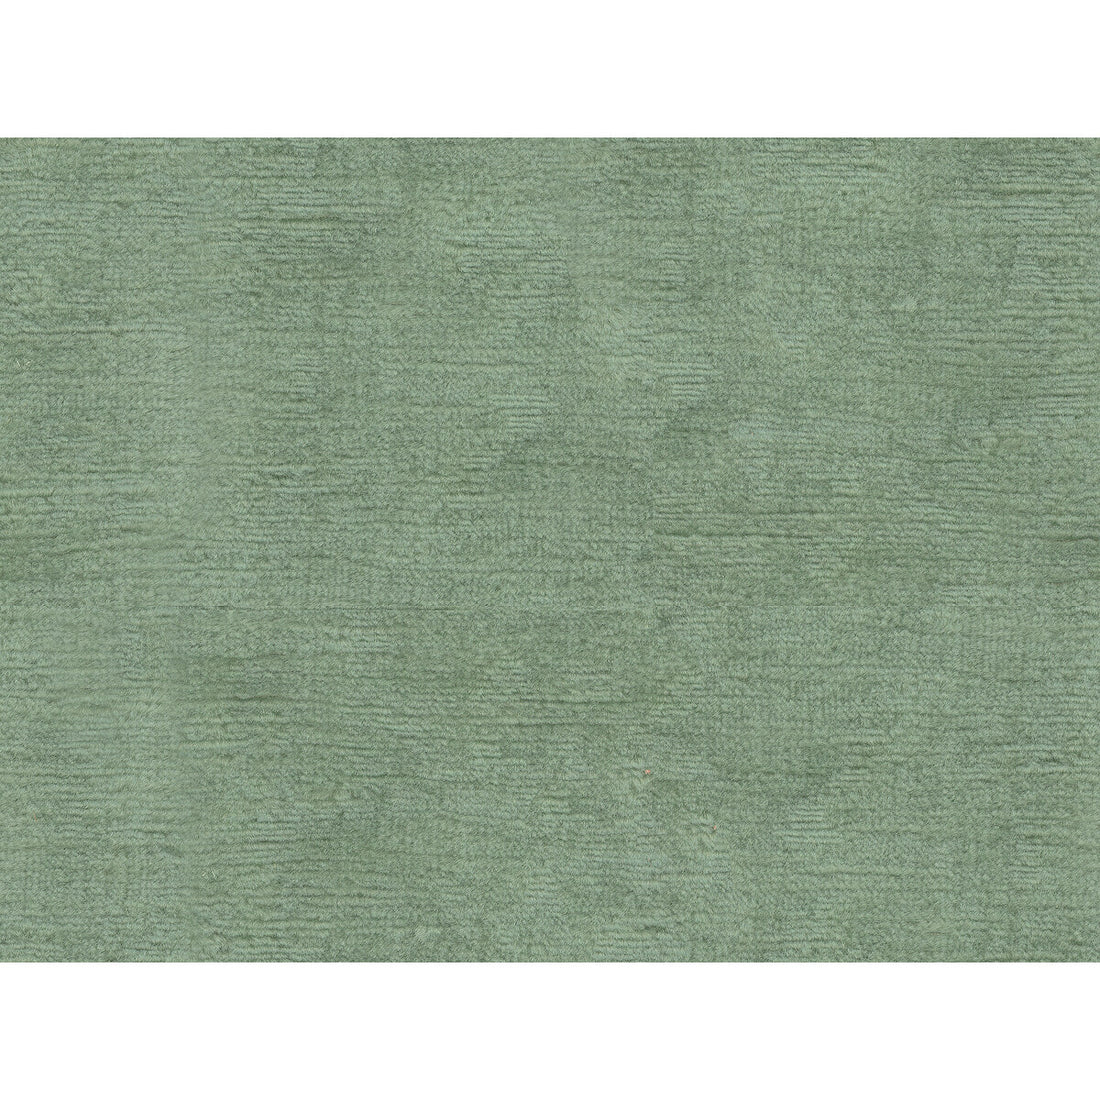 Fulham Linen V fabric in jade color - pattern 2016133.323.0 - by Lee Jofa